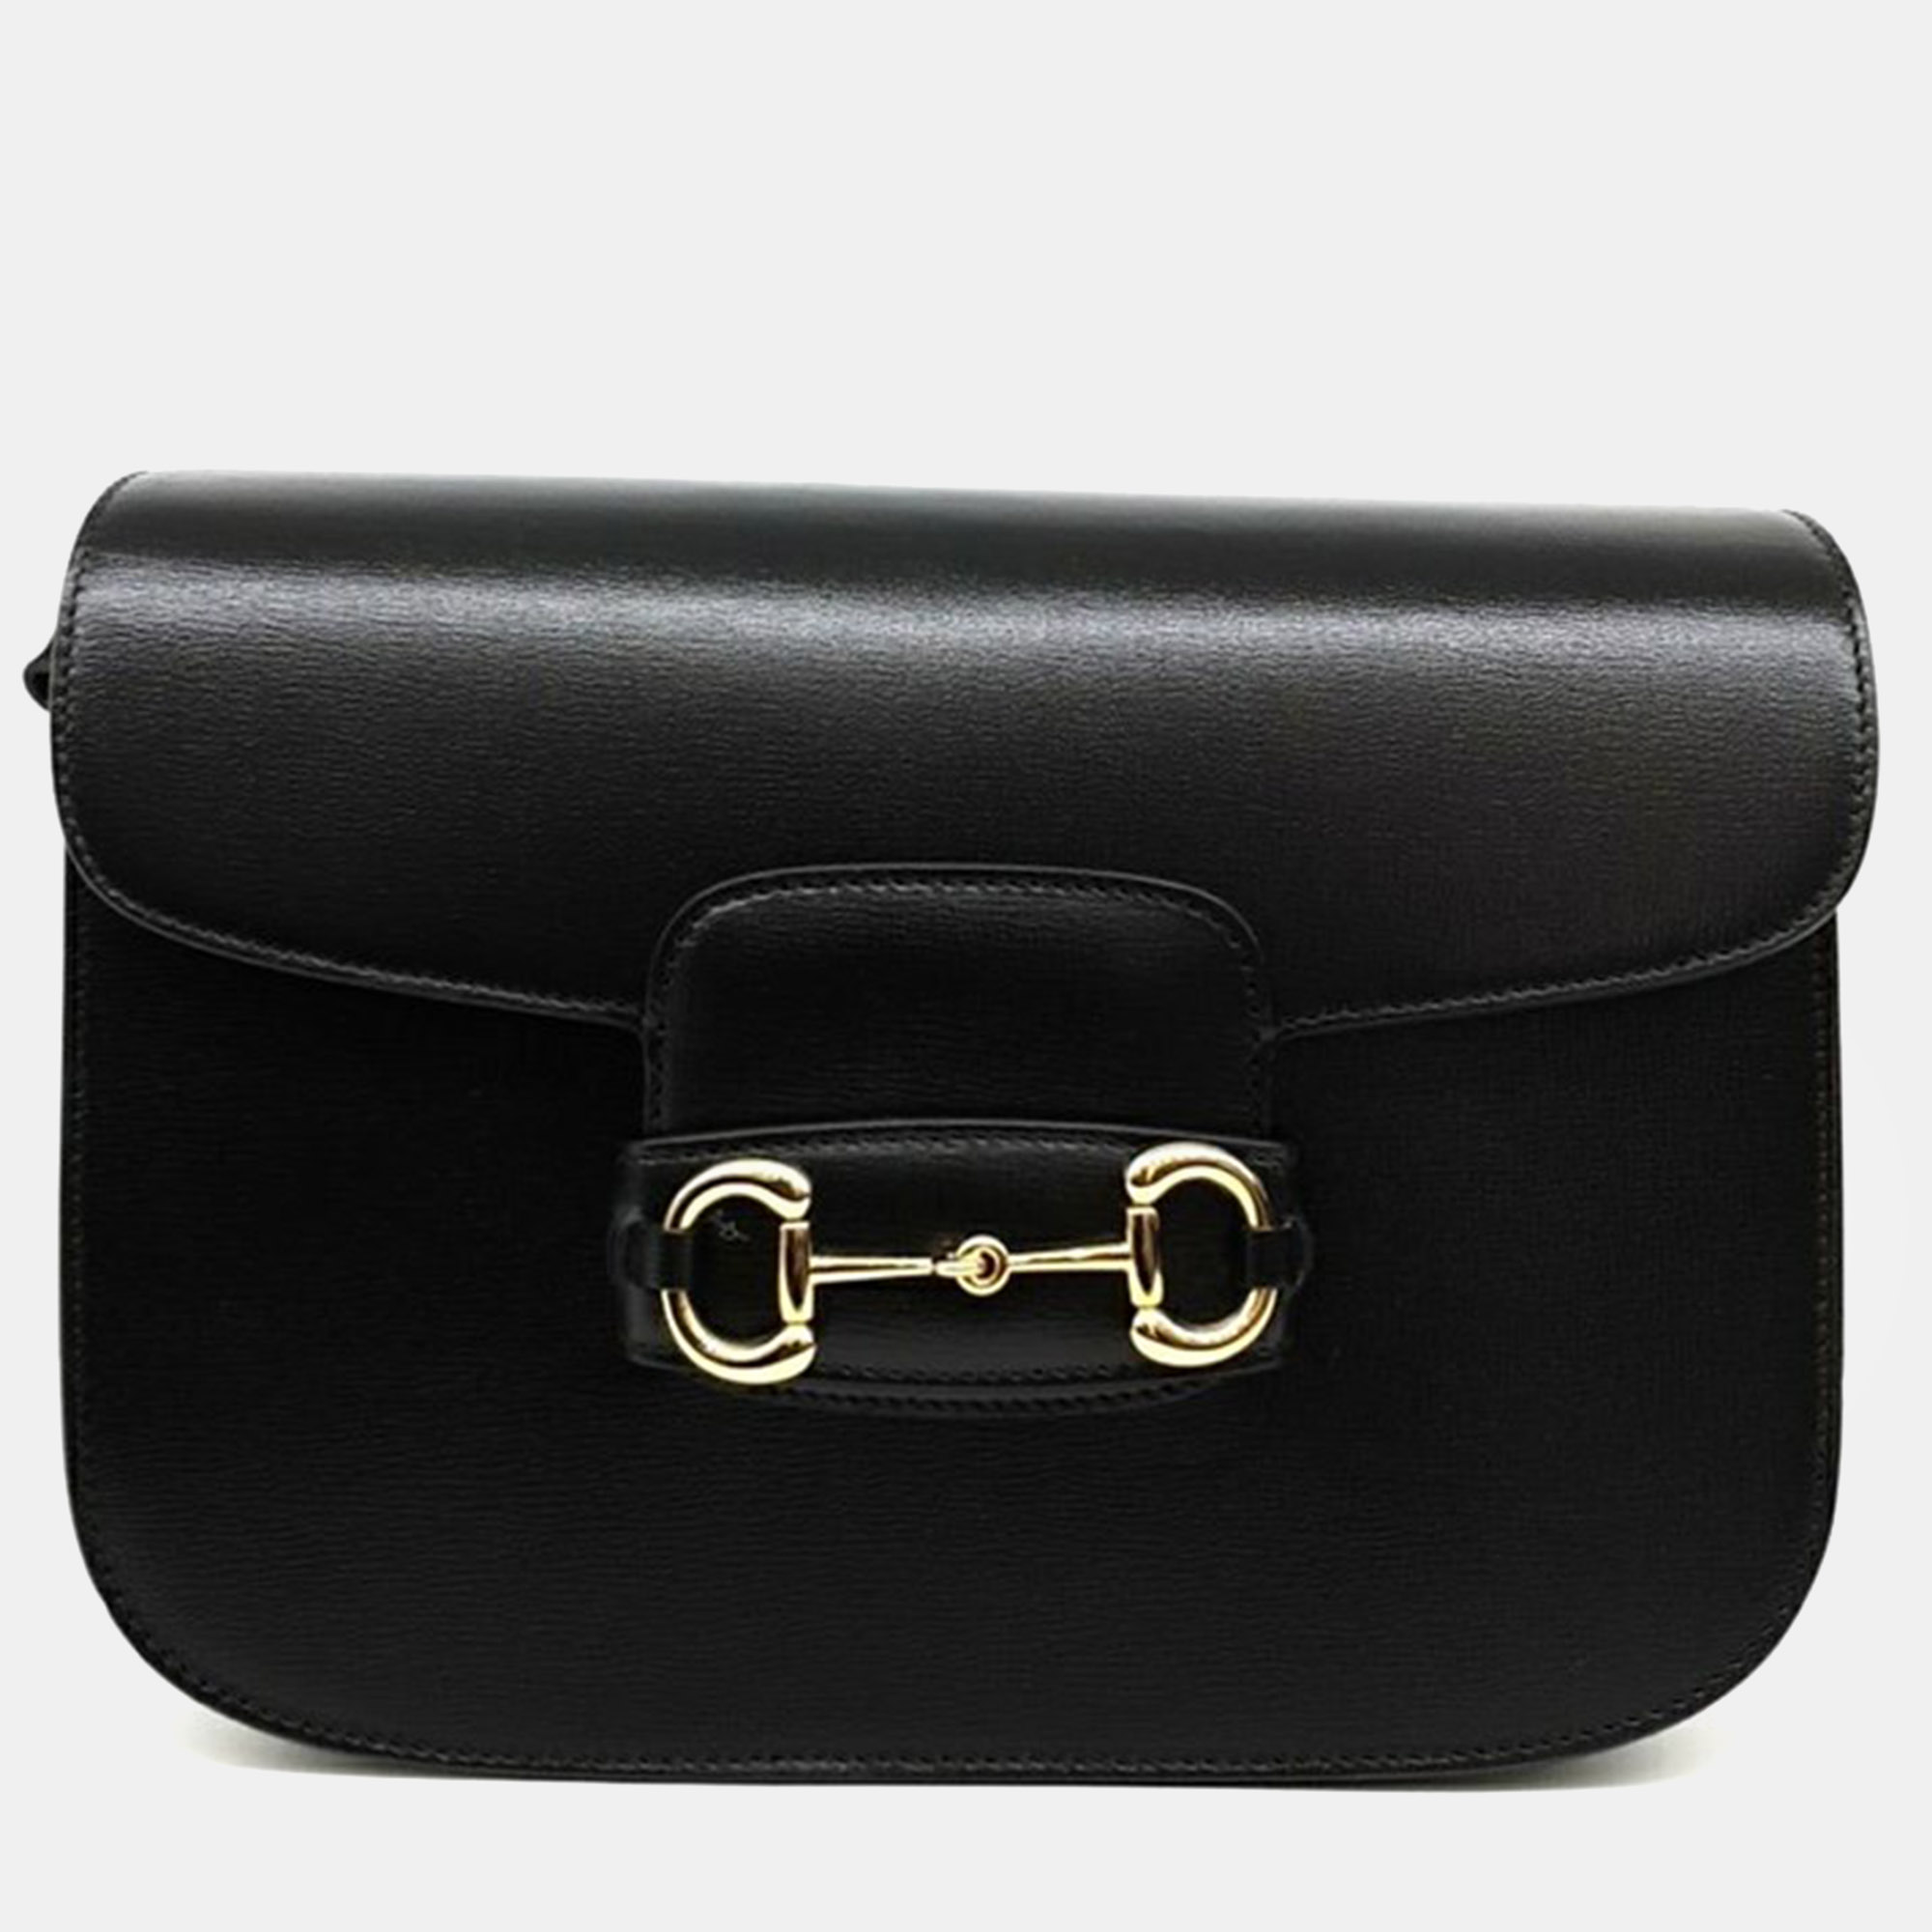 Uncompromising in quality and design this Gucci shoulder bag is a must have in any wardrobe. With its durable construction and luxurious finish its the perfect accessory for any occasion.